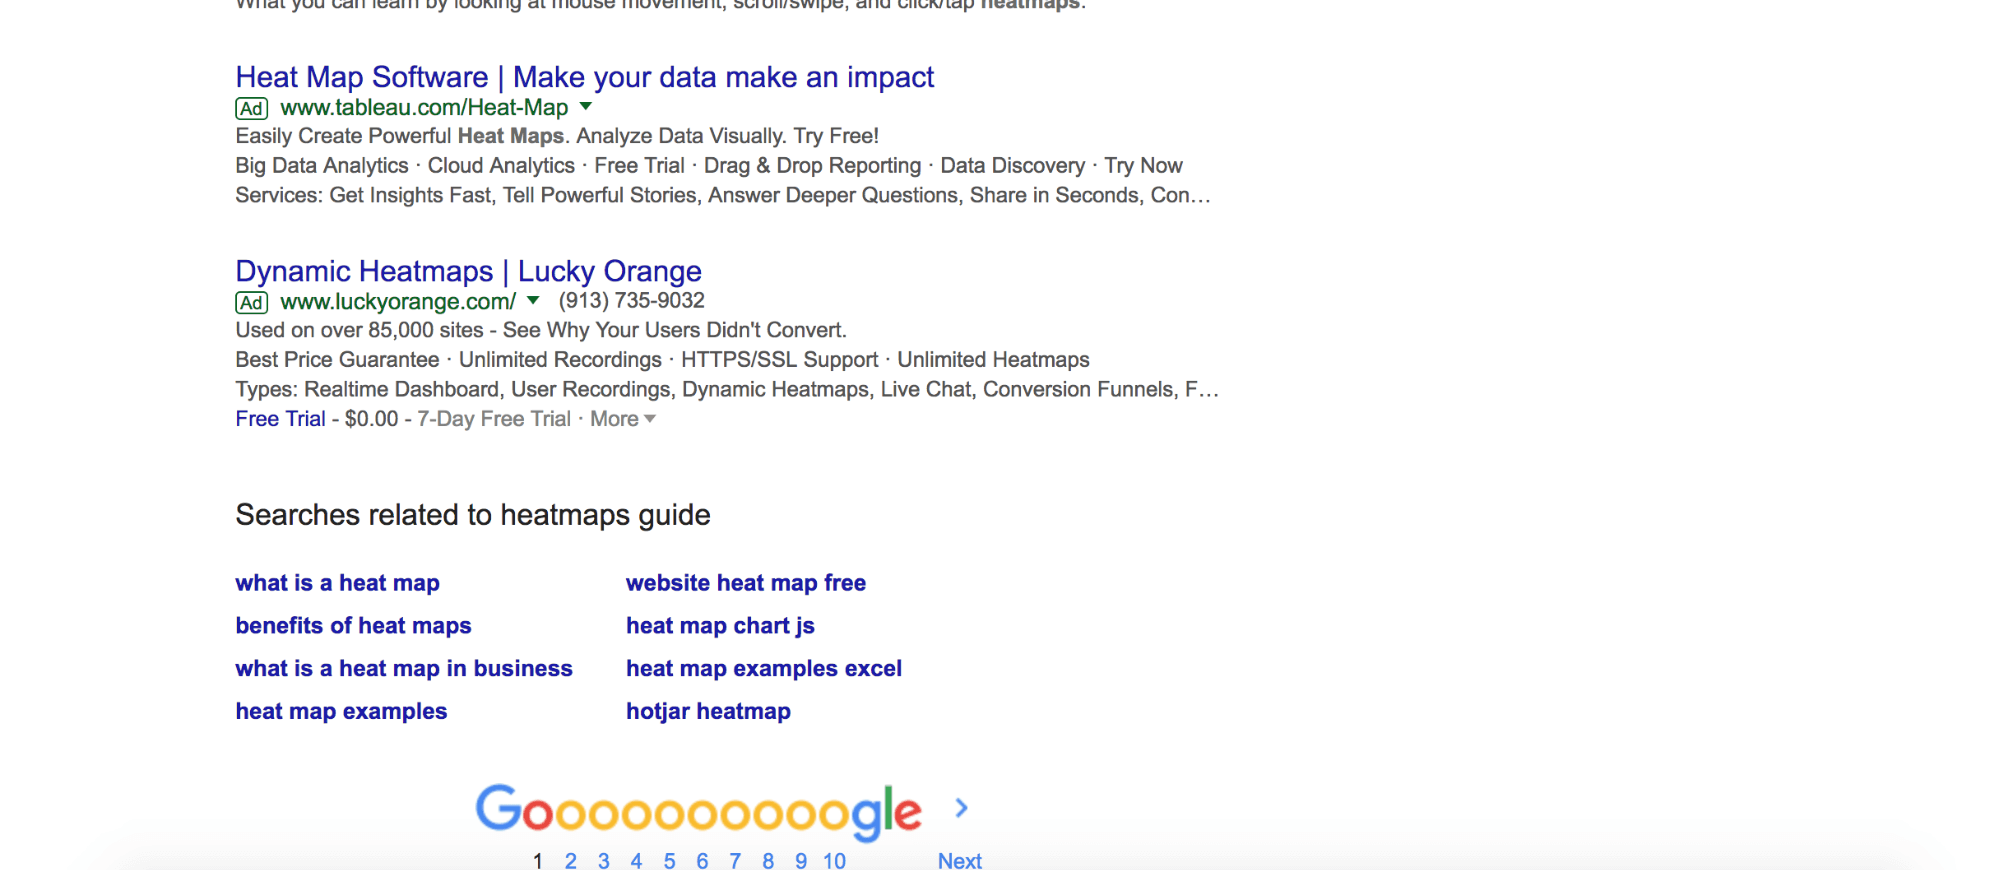 google search results for heatmaps at bottom of SERP